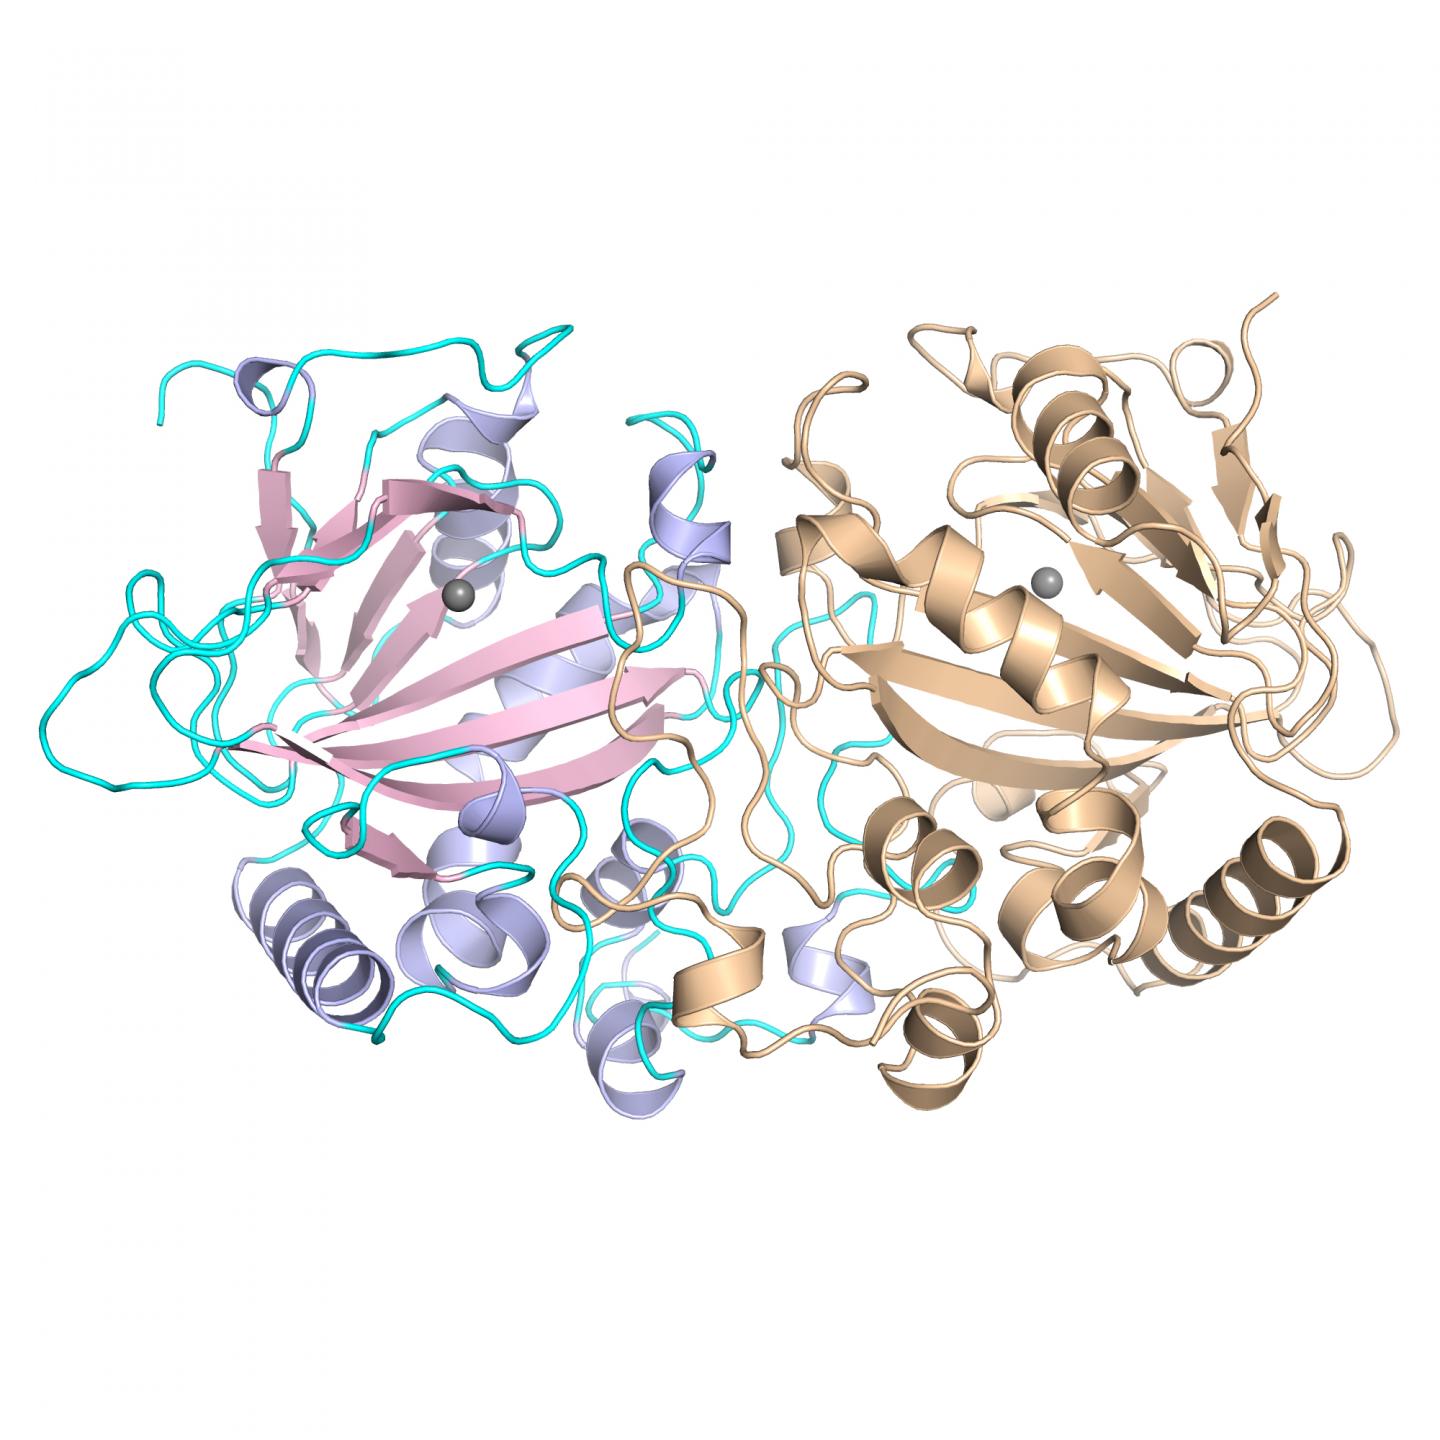 Structure of FtmOx1 Enzyme